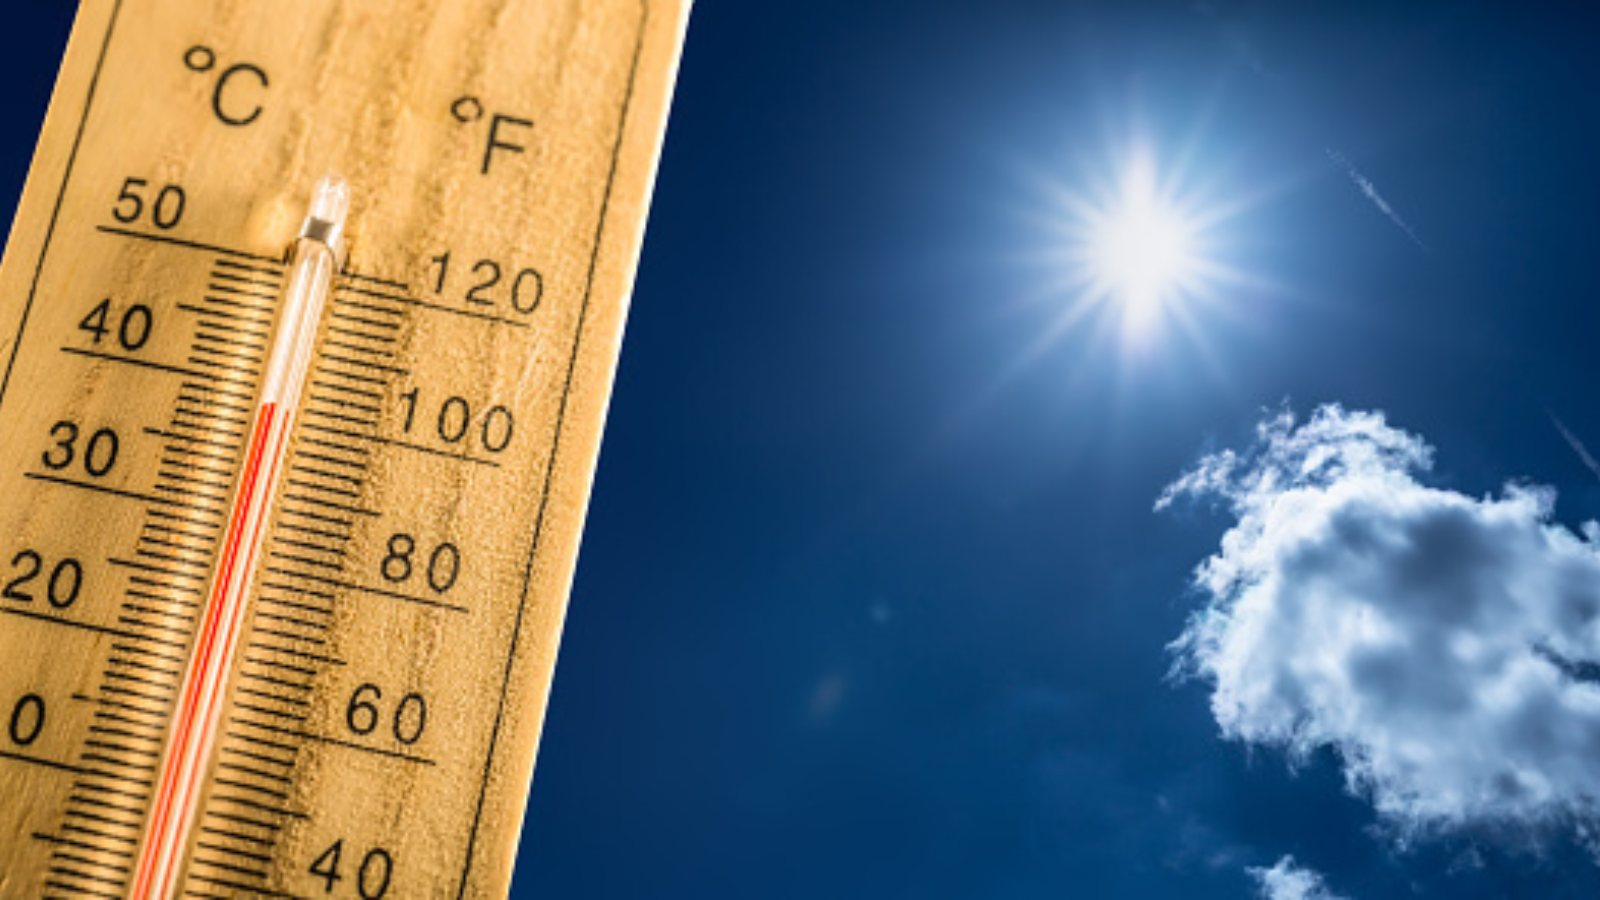 stock photo of a thermometer with a high temperature and a sunny sky behind it